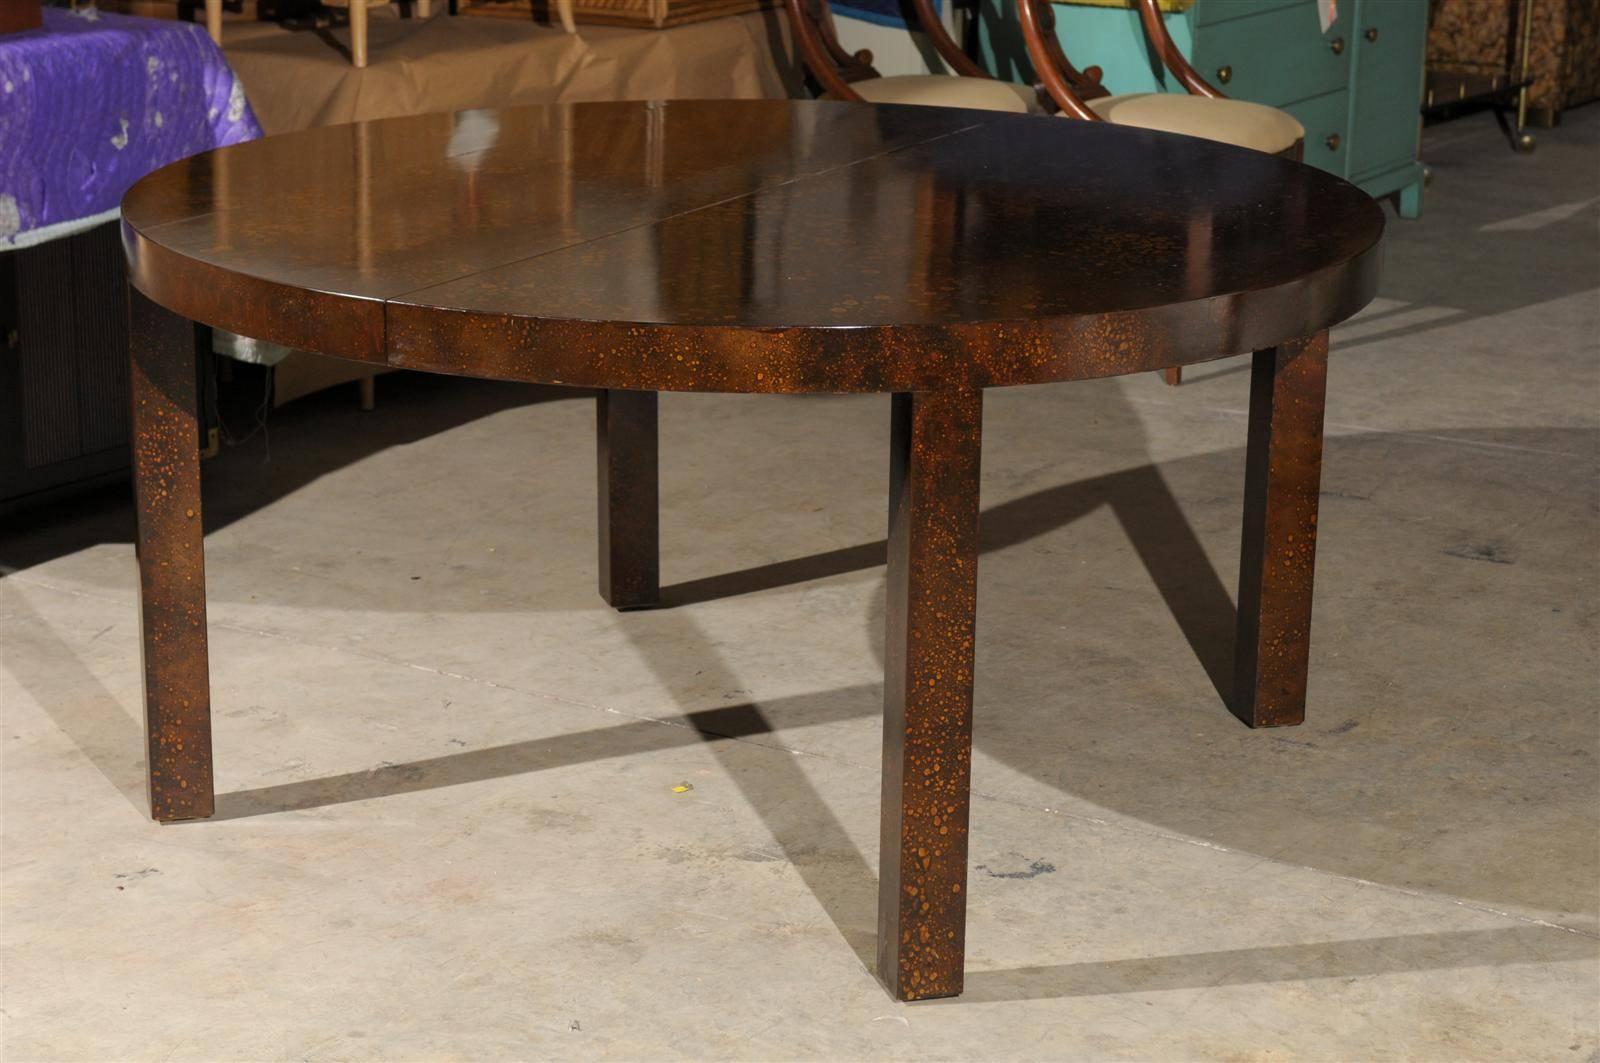 A fabulous vintage Parsons style dining table, circa 1970.  Oil drop lacquer finish which replicates the look of Tortoise Shell.  Heavy and beautifully made.  This table may be separated and easily modified to use as a dramatic pair of console